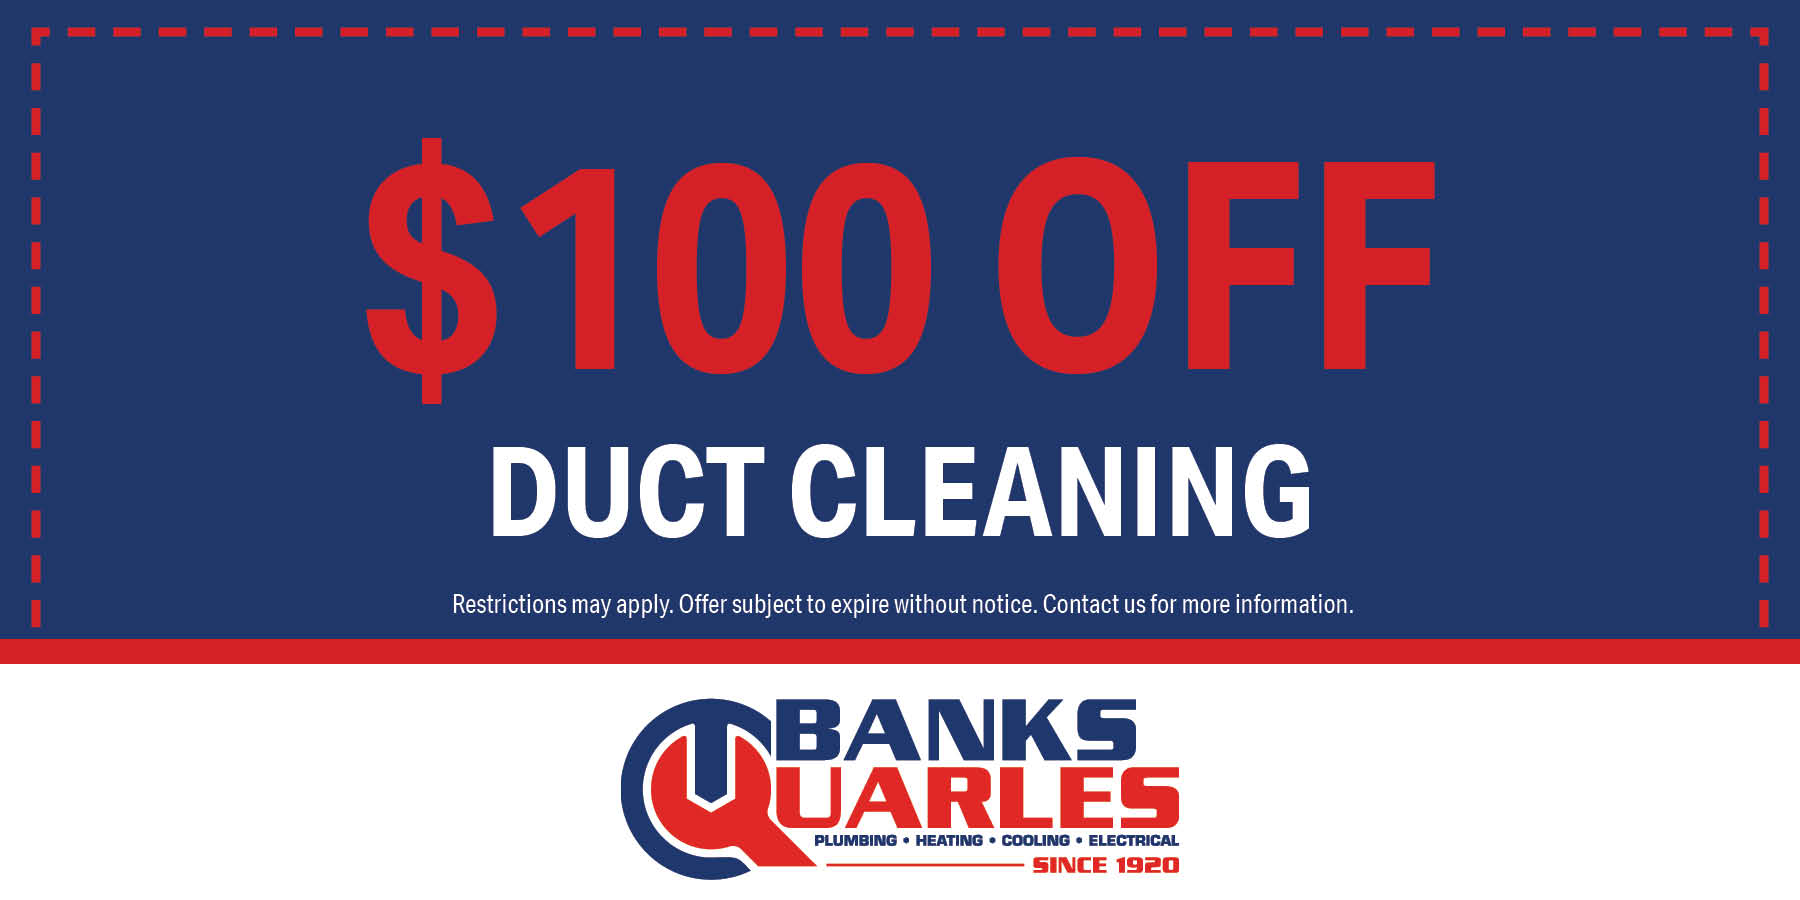 $100 duct cleaning. Offer subject to expire without warning. Contact us for details.